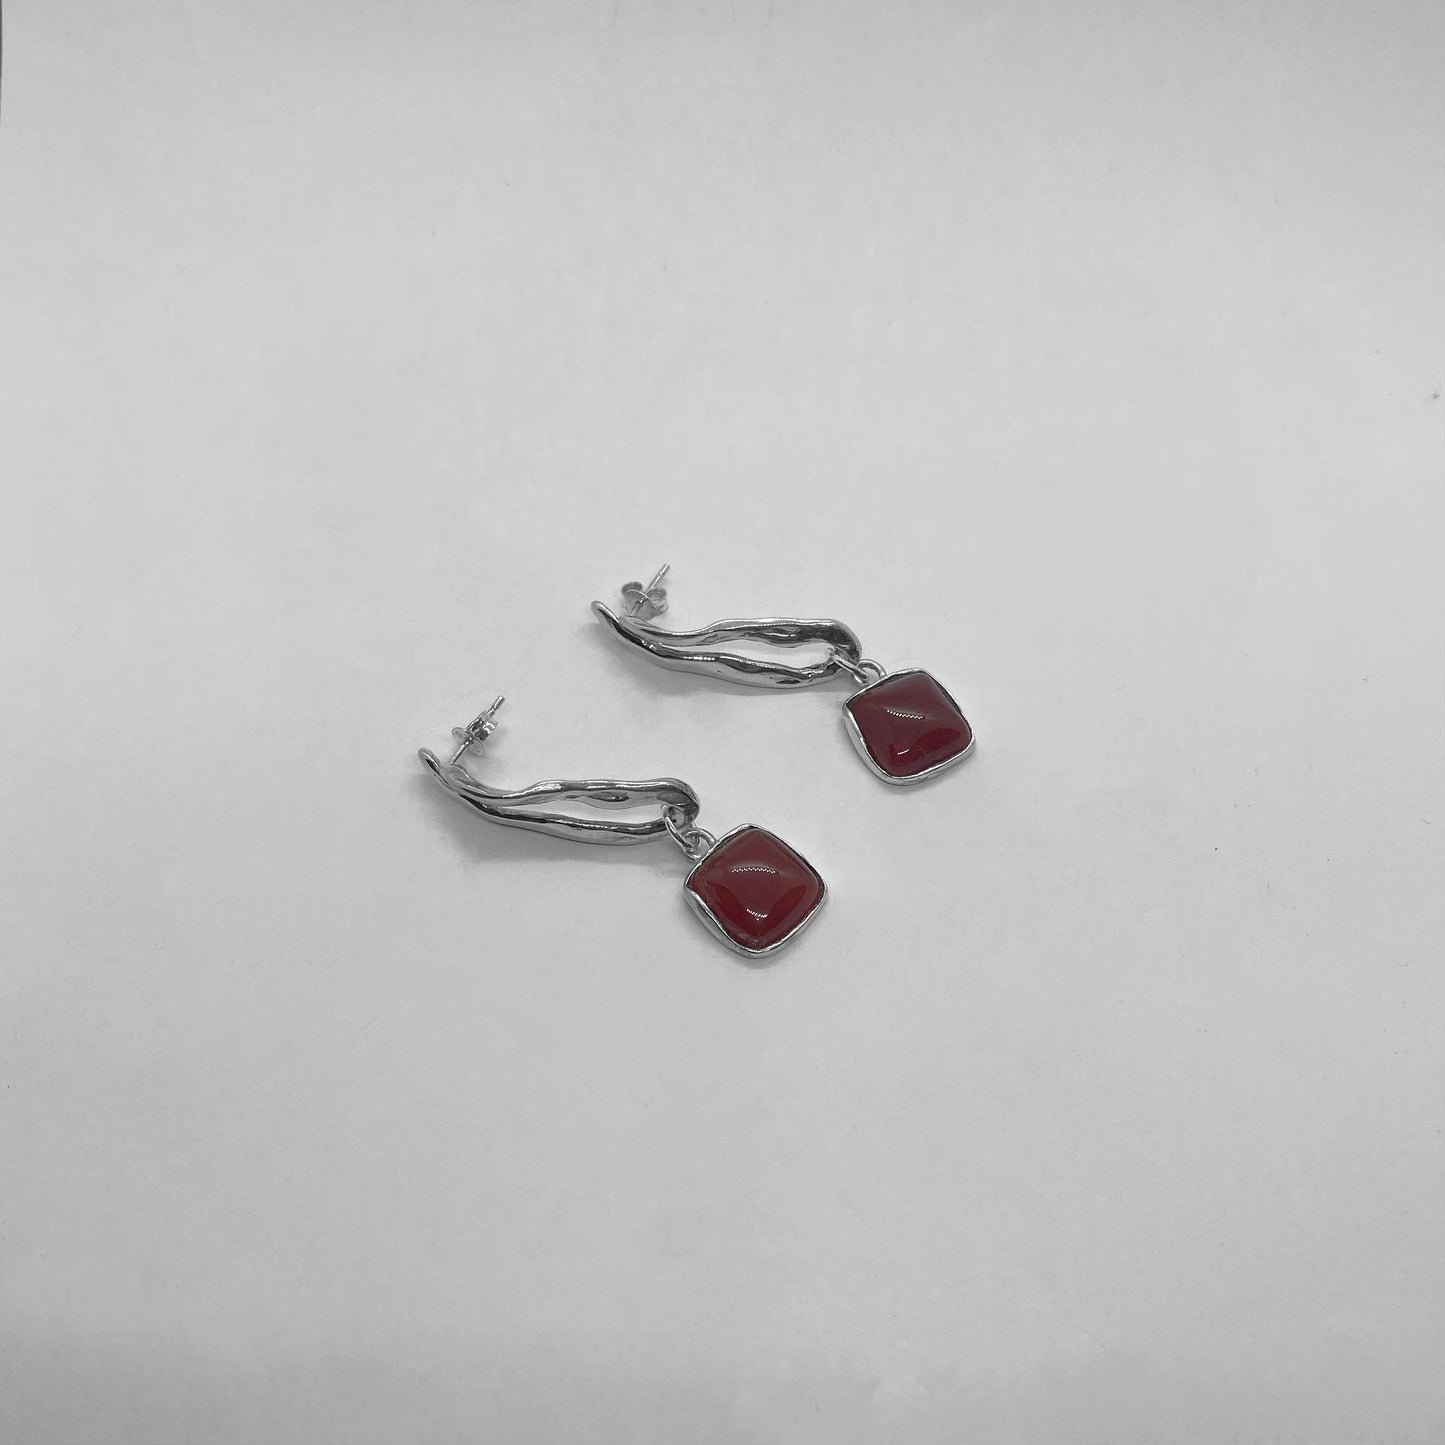 Handmade earrings crafted from sterling silver 925 with a semi-precious stone